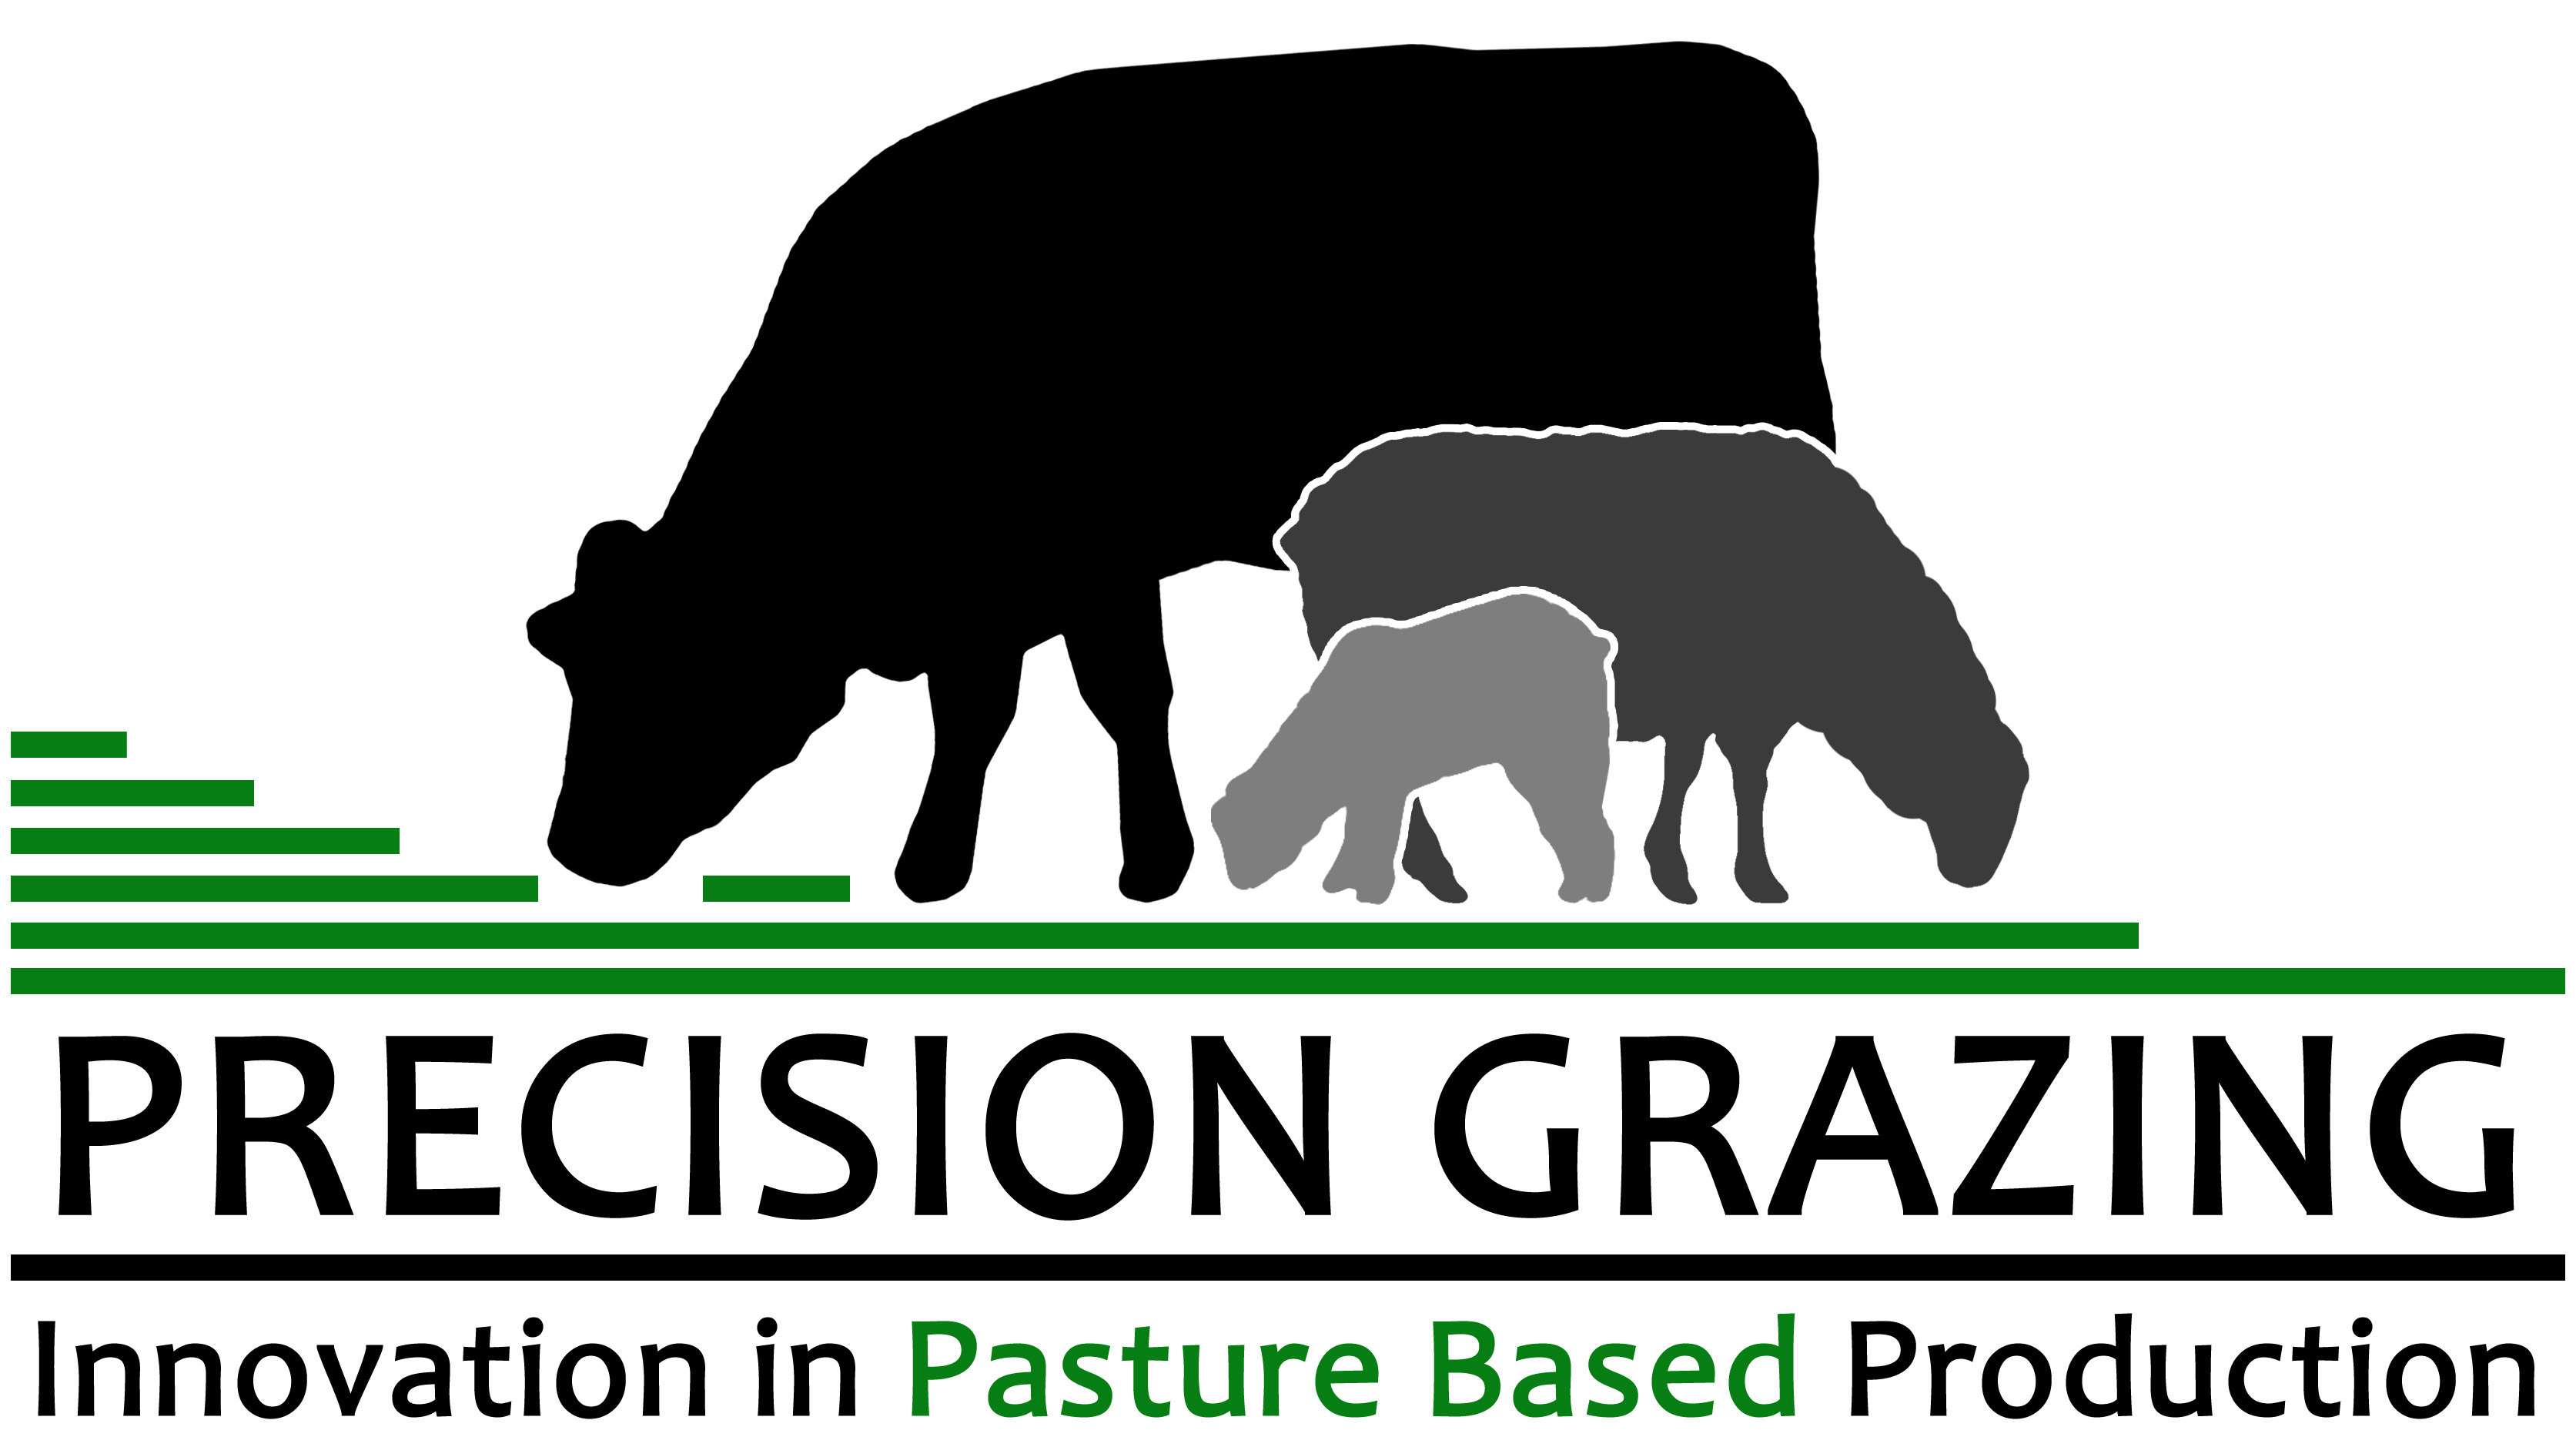 PRECISION GRAZING. Innovation in Pasture Based Production.